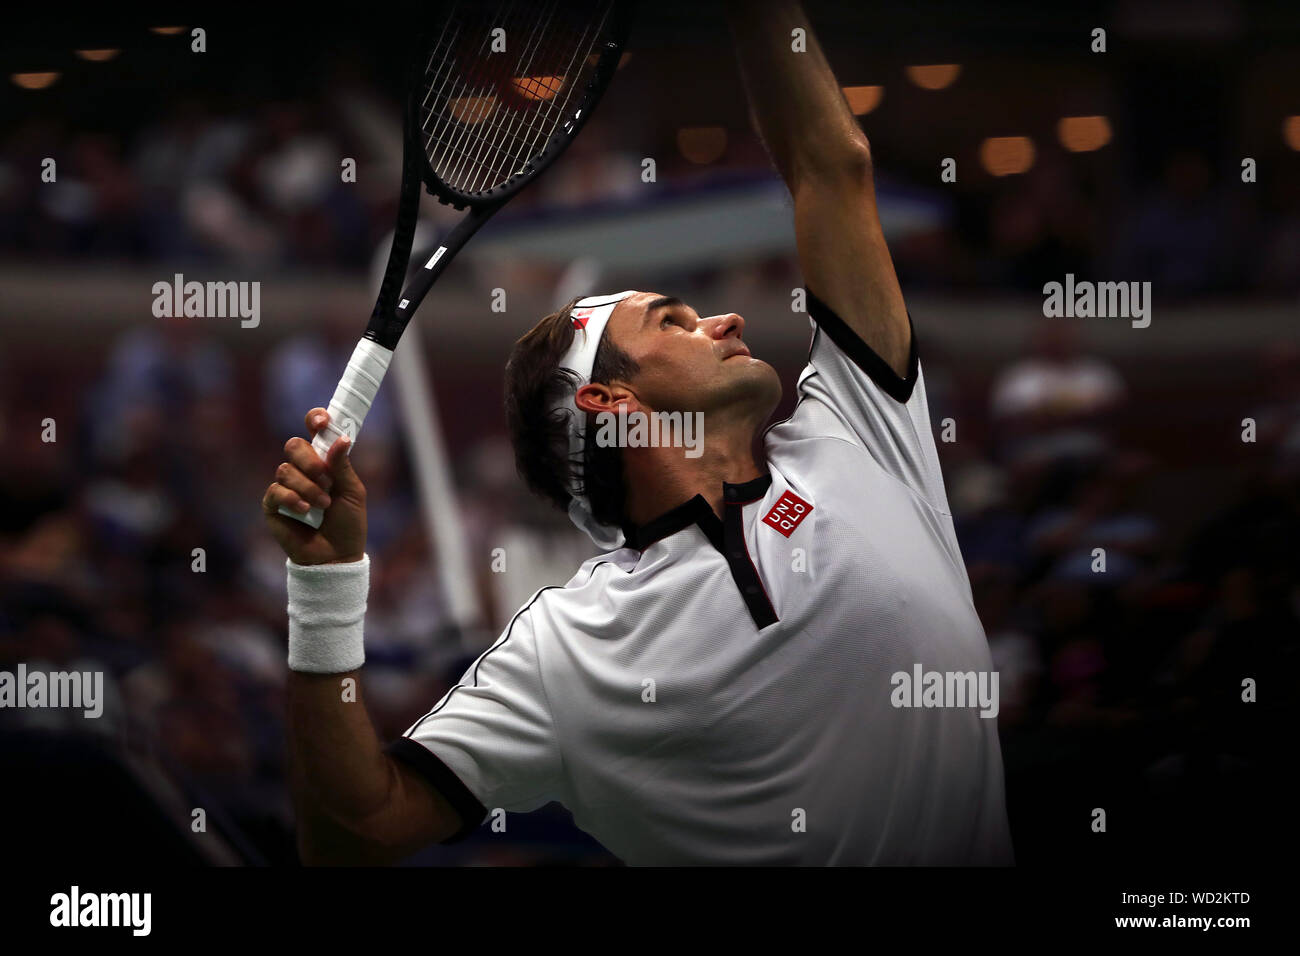 Roger Federer Age High Resolution Stock Photography and Images - Alamy